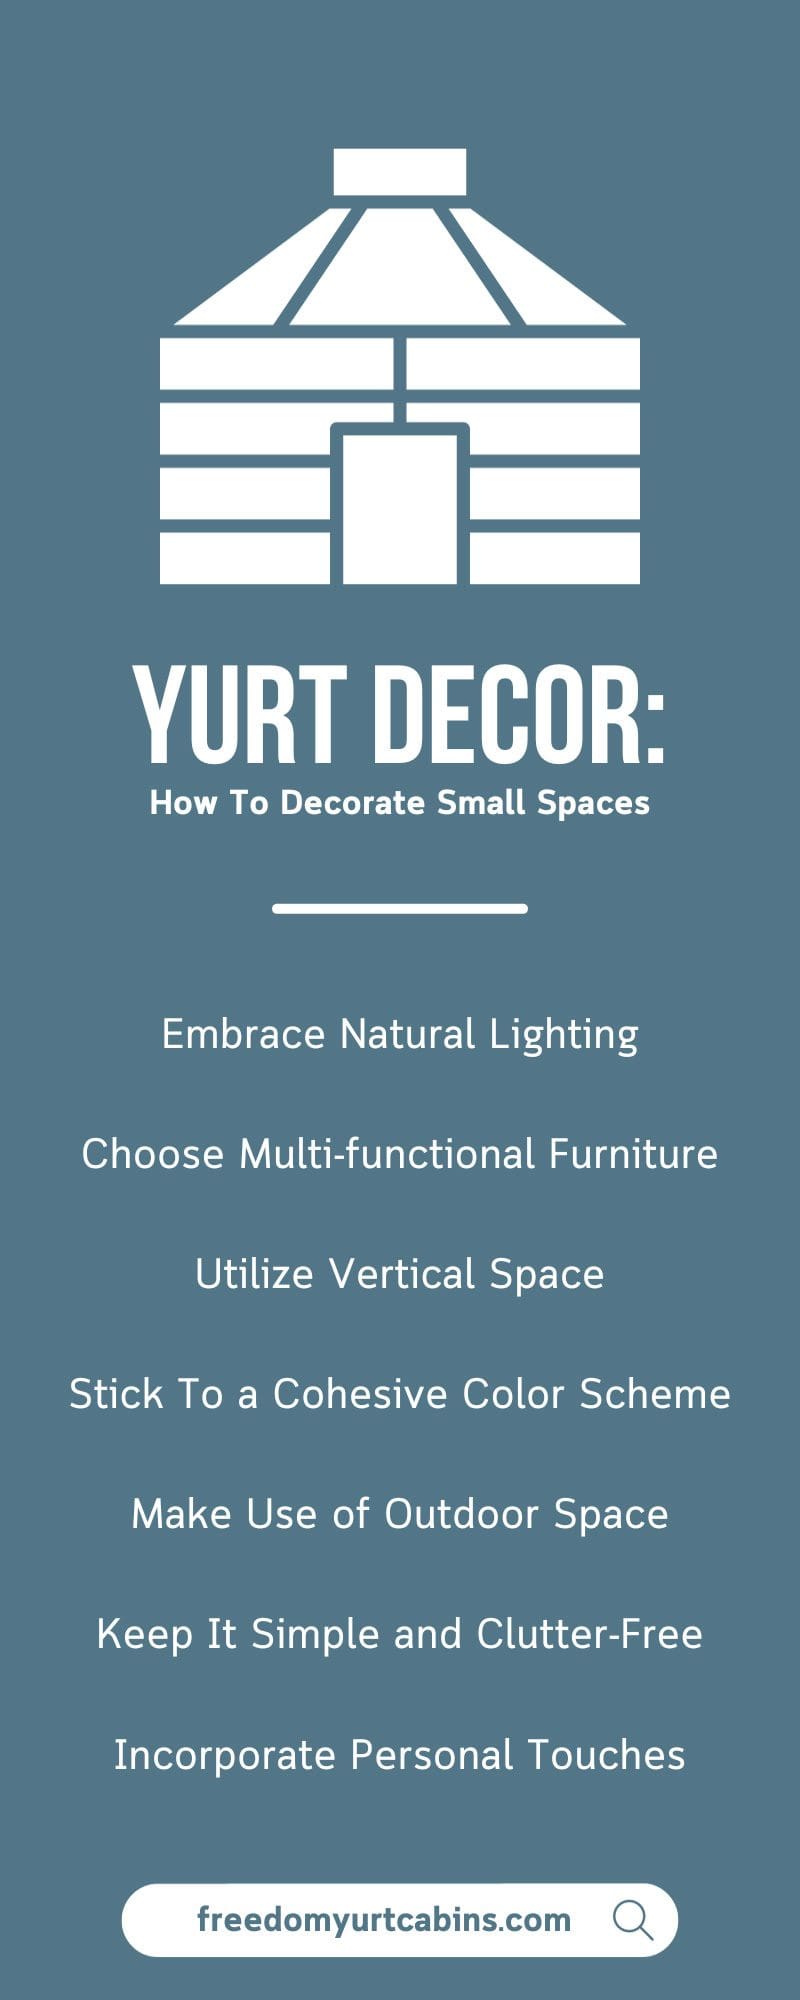 Yurt Decor: How To Decorate Small Spaces